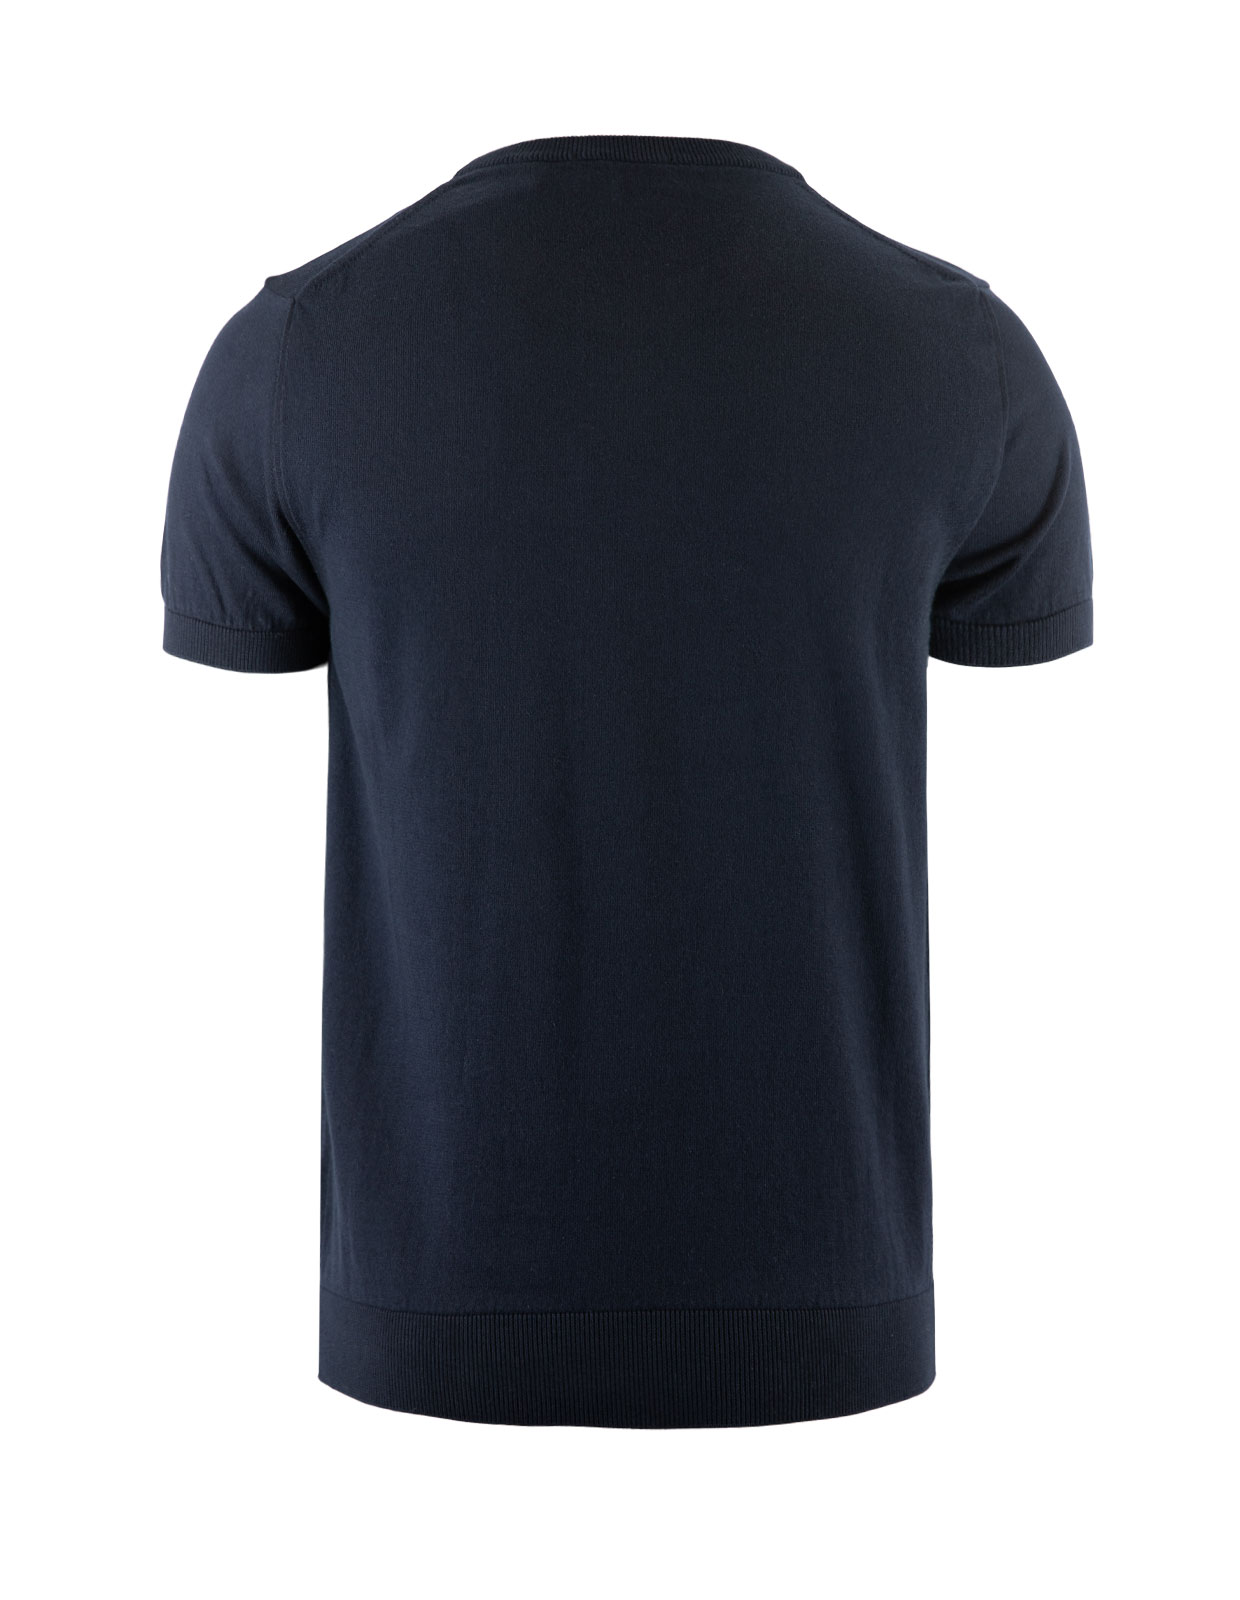 New T-Shirt Fine Knitted Cotton Blue Navy